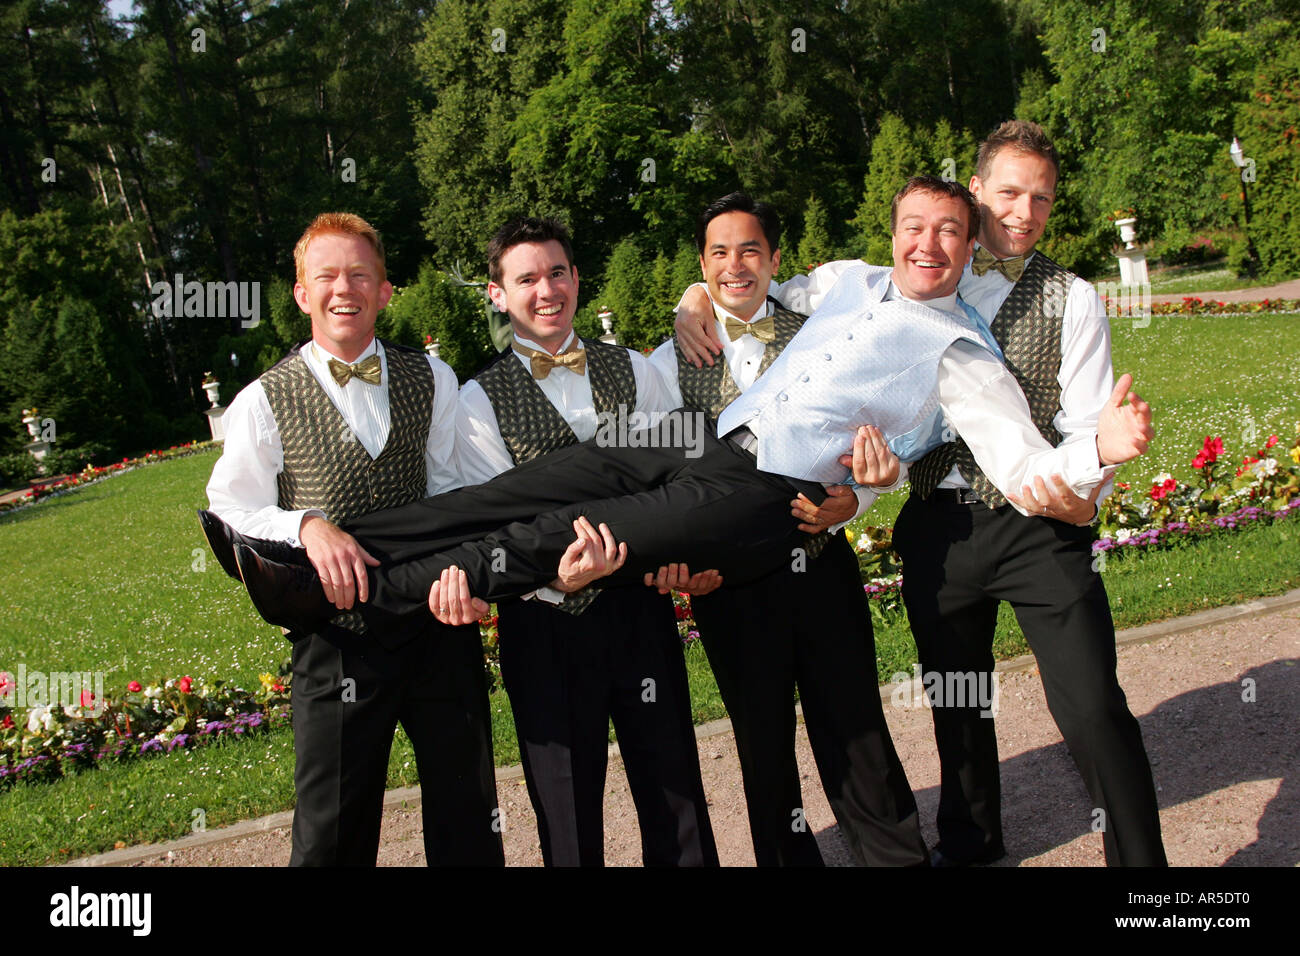 A Groom on his wedding day being held in the air by his groomsmen and best man Stock Photo